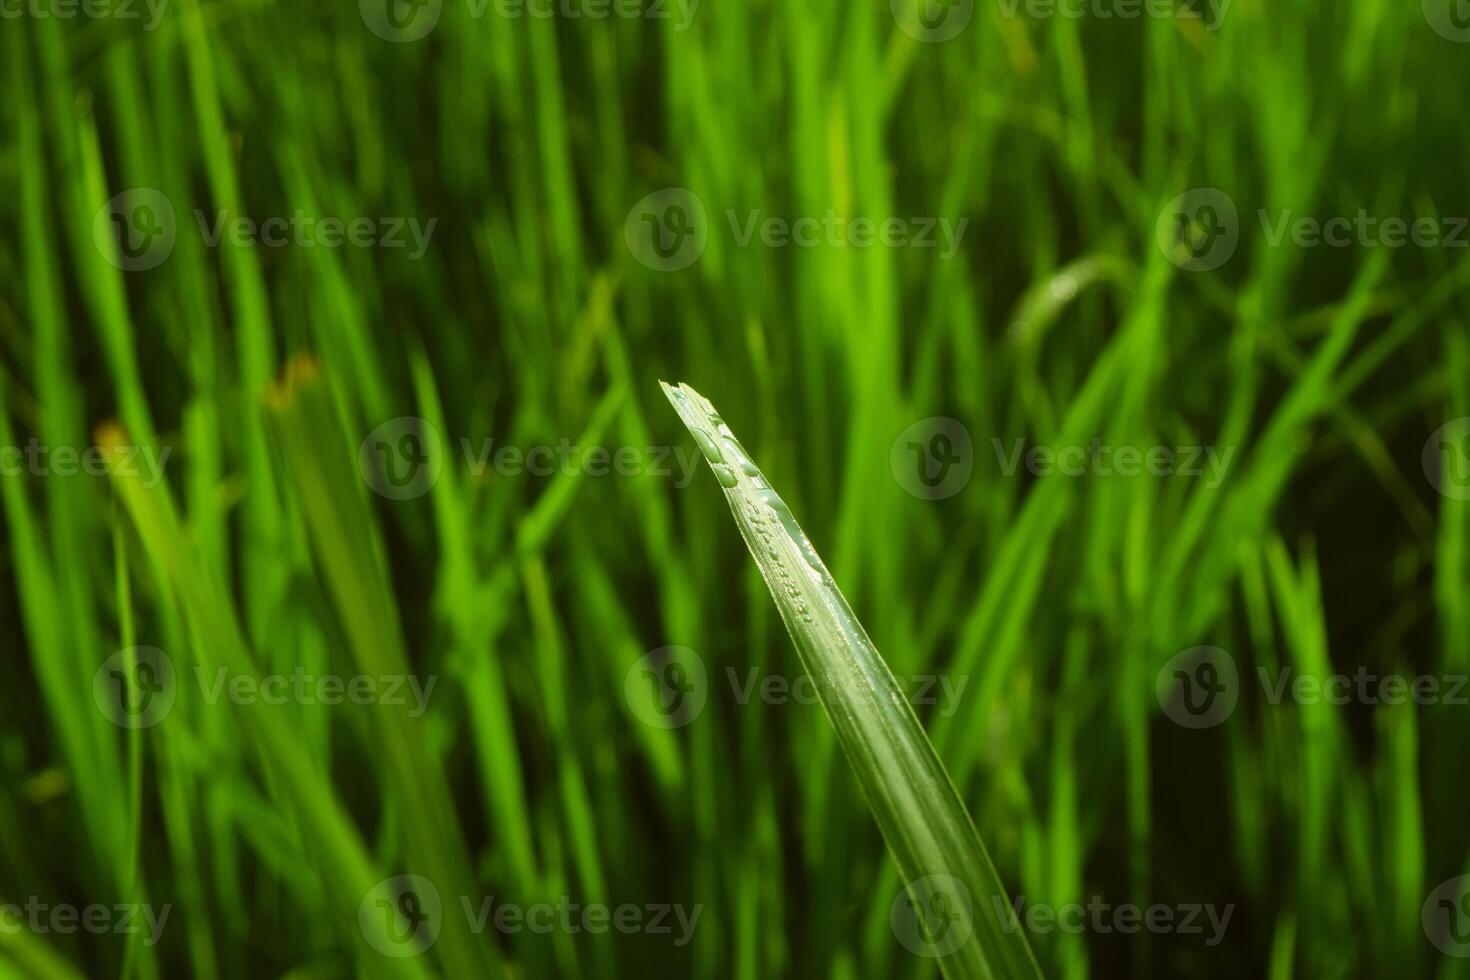 The grass exposed to dew in the morning photo